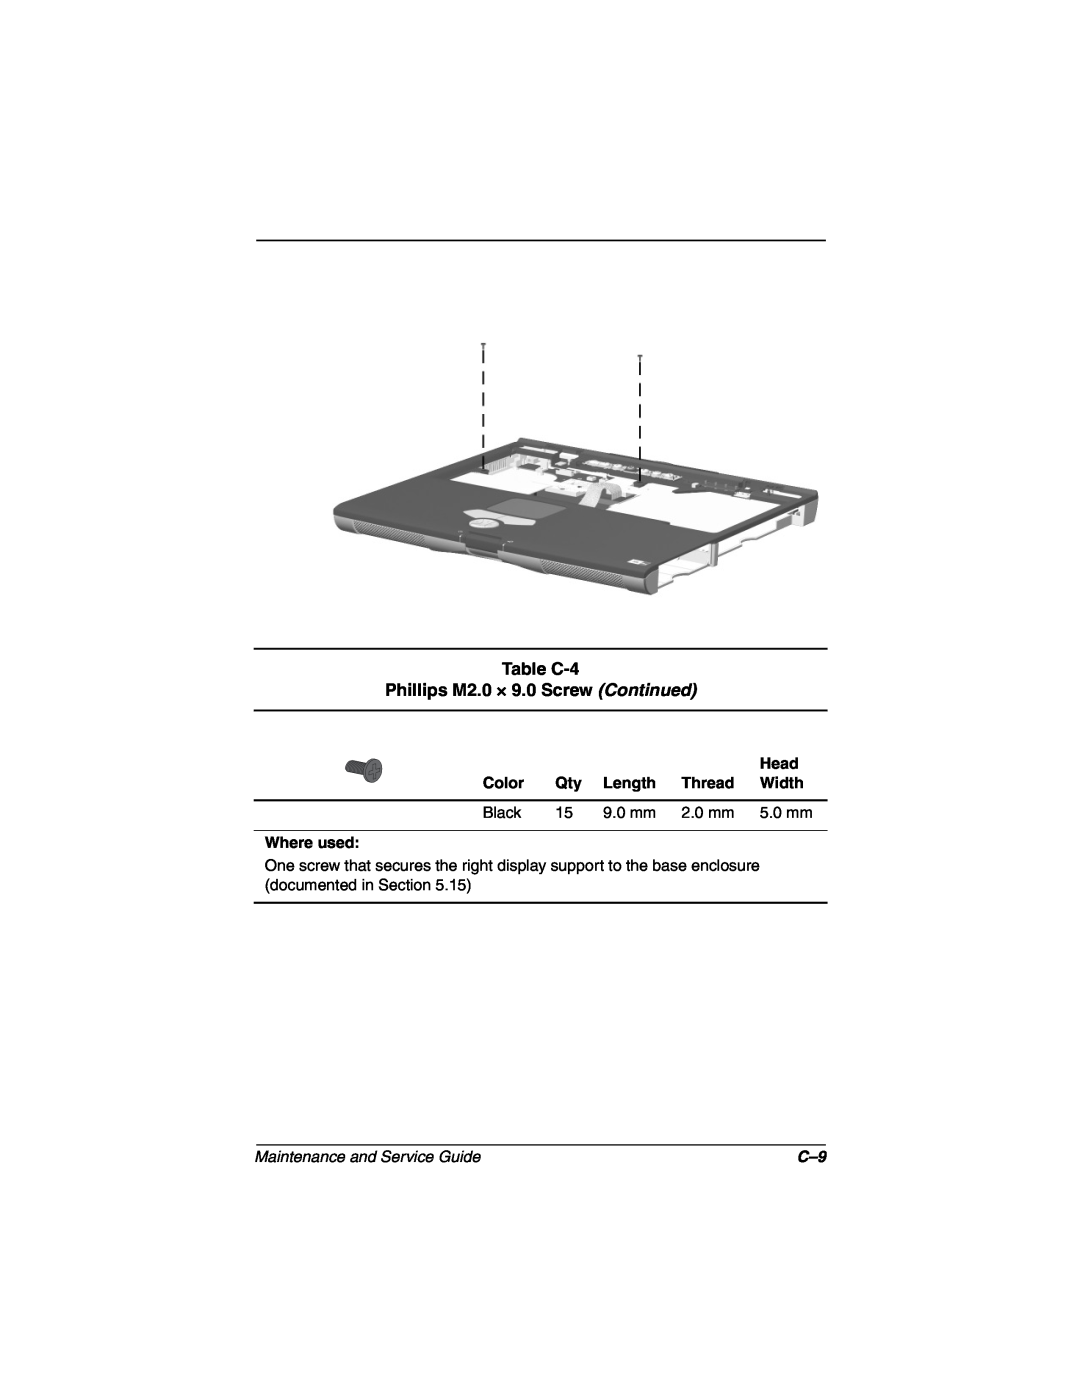 Compaq N160 manual Table C-4 Phillips M2.0 × 9.0 Screw Continued, Maintenance and Service Guide 